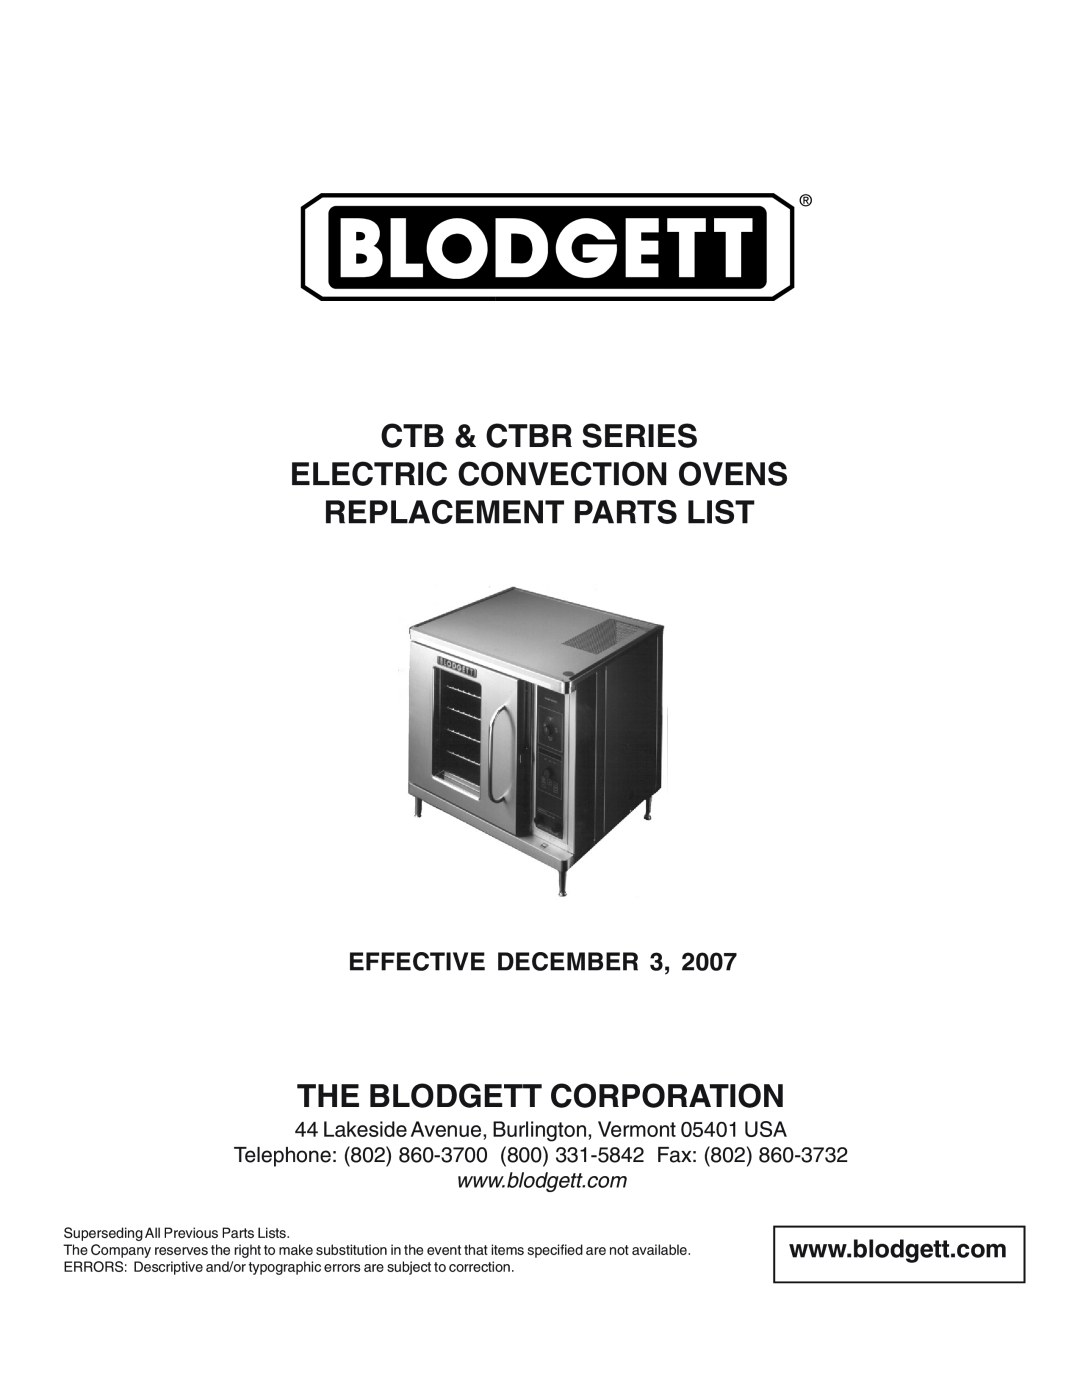 Blodgett CTBR manual Effective December, Ctb & Ctbr Series Electric Convection Ovens, Replacement Parts List 